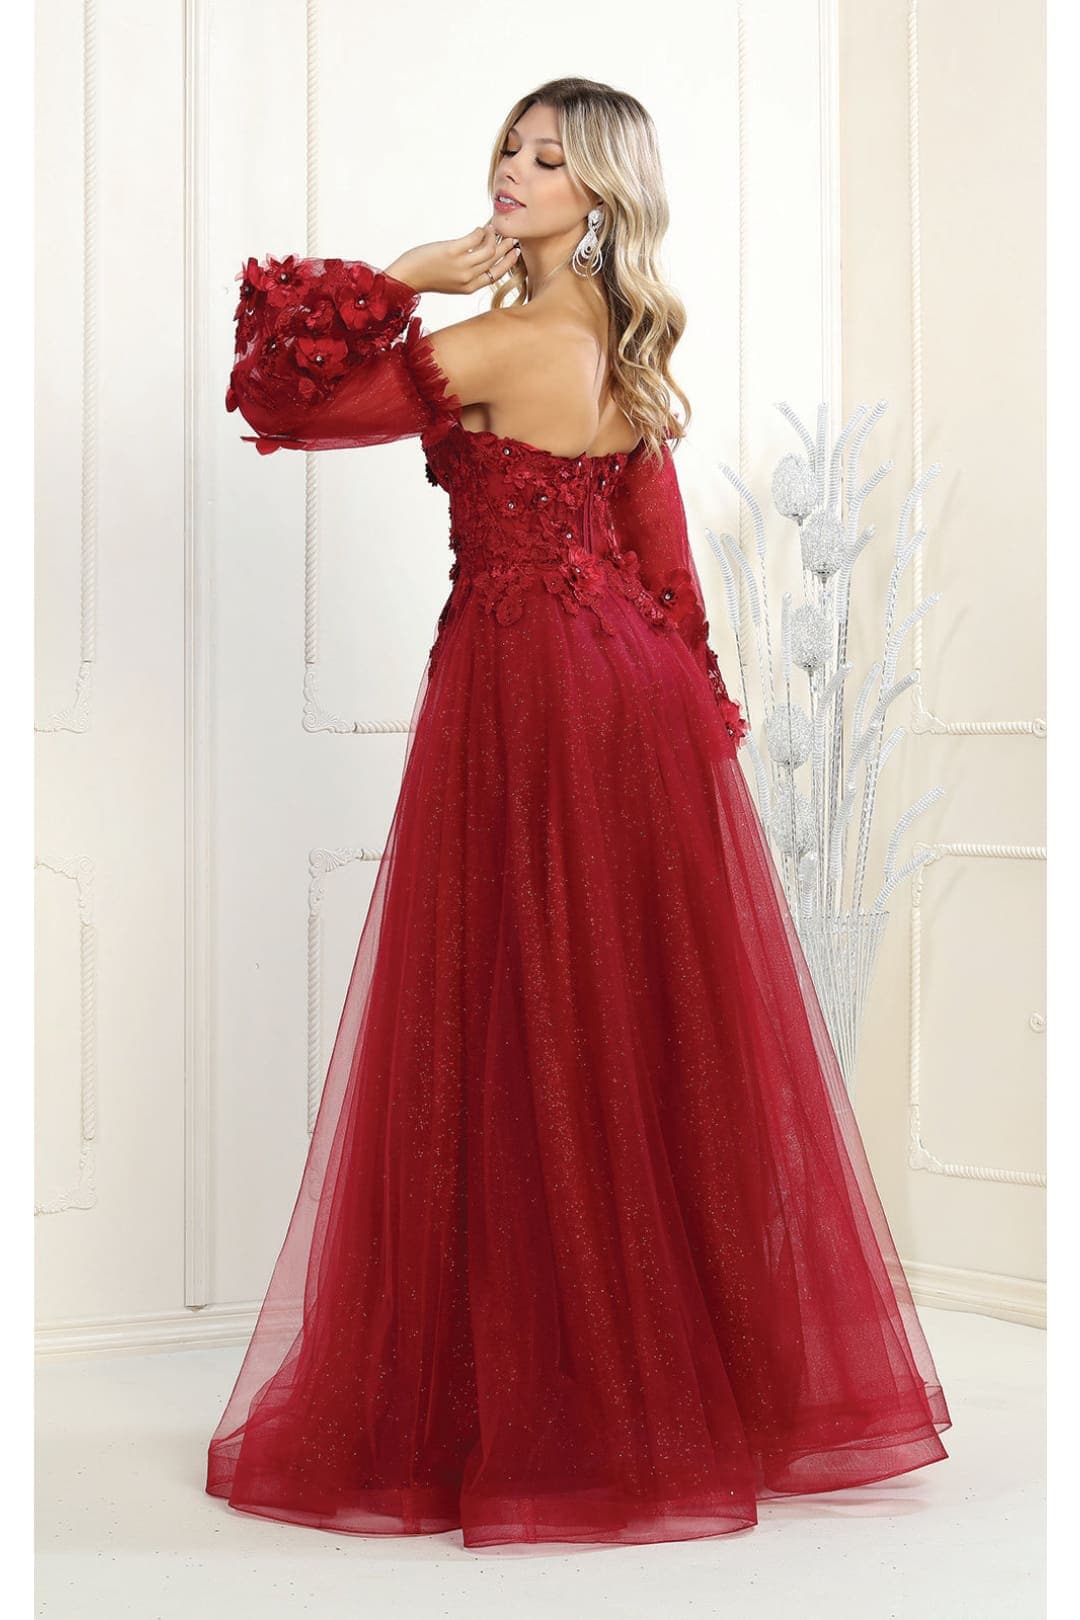 Red Carpet Formal Gowns